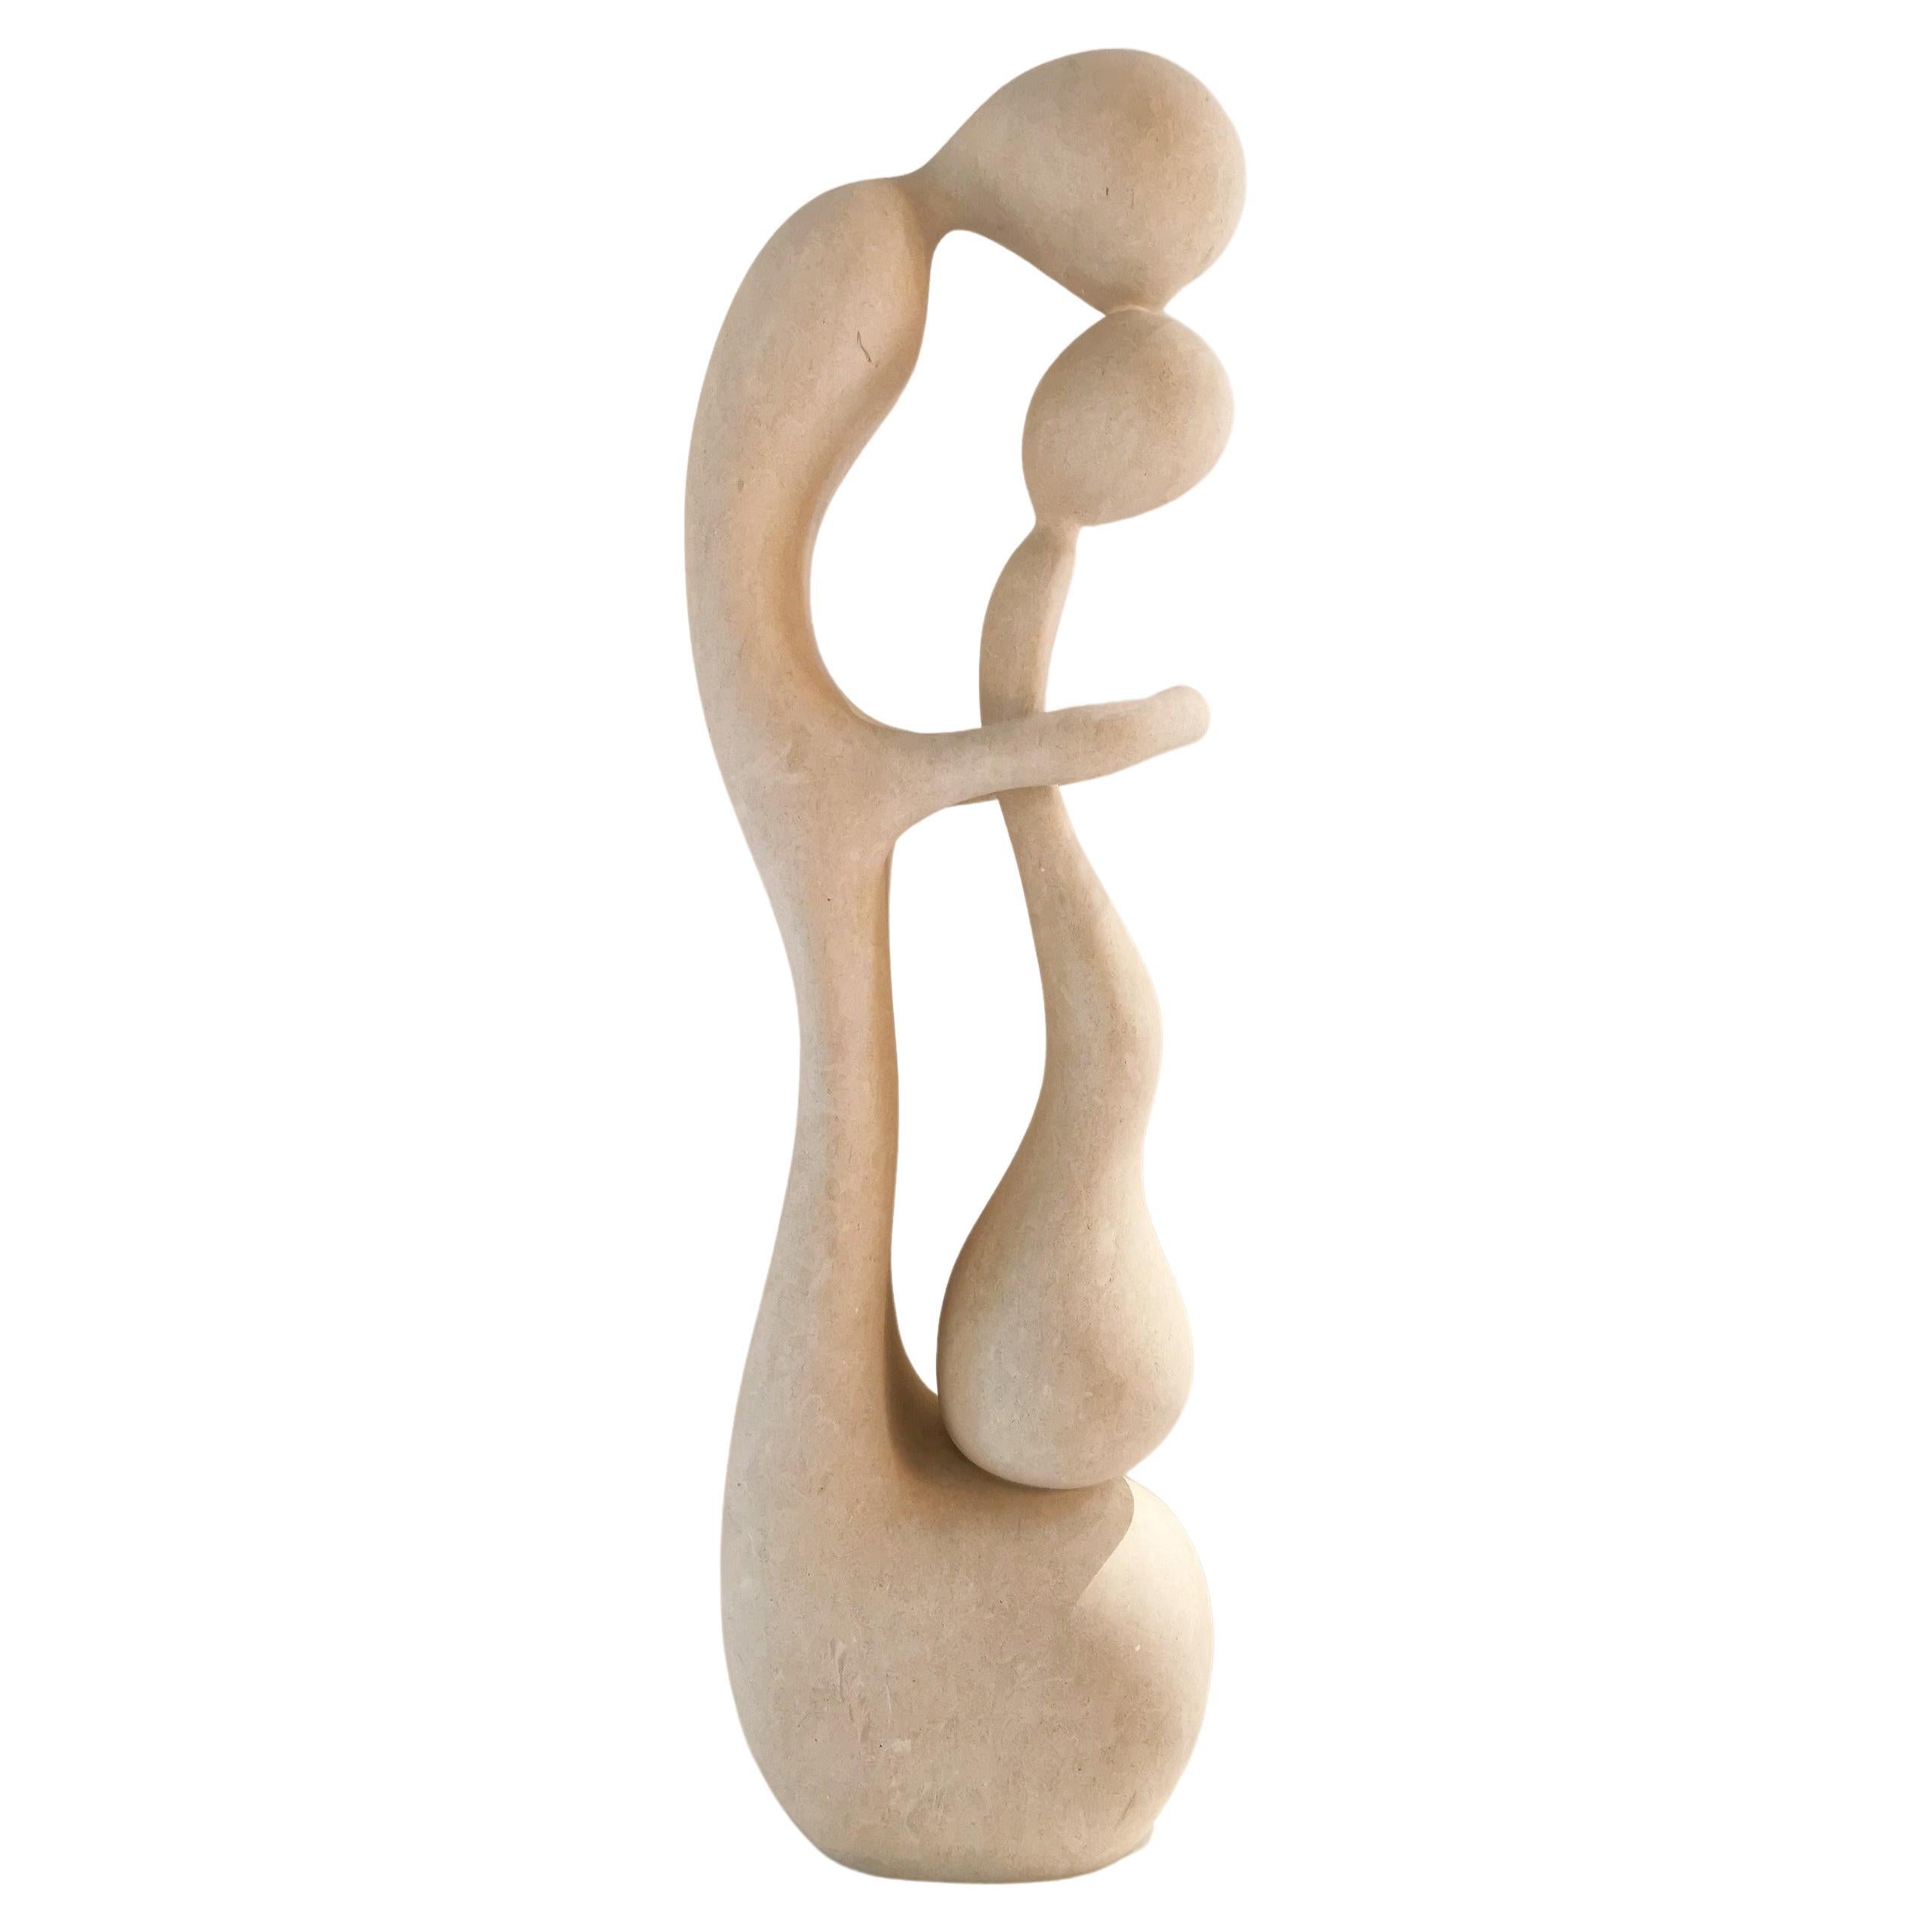 21st Century Abstract Sculpture AMPLEXUS 80 cm height by Renzo Buttazzo For Sale